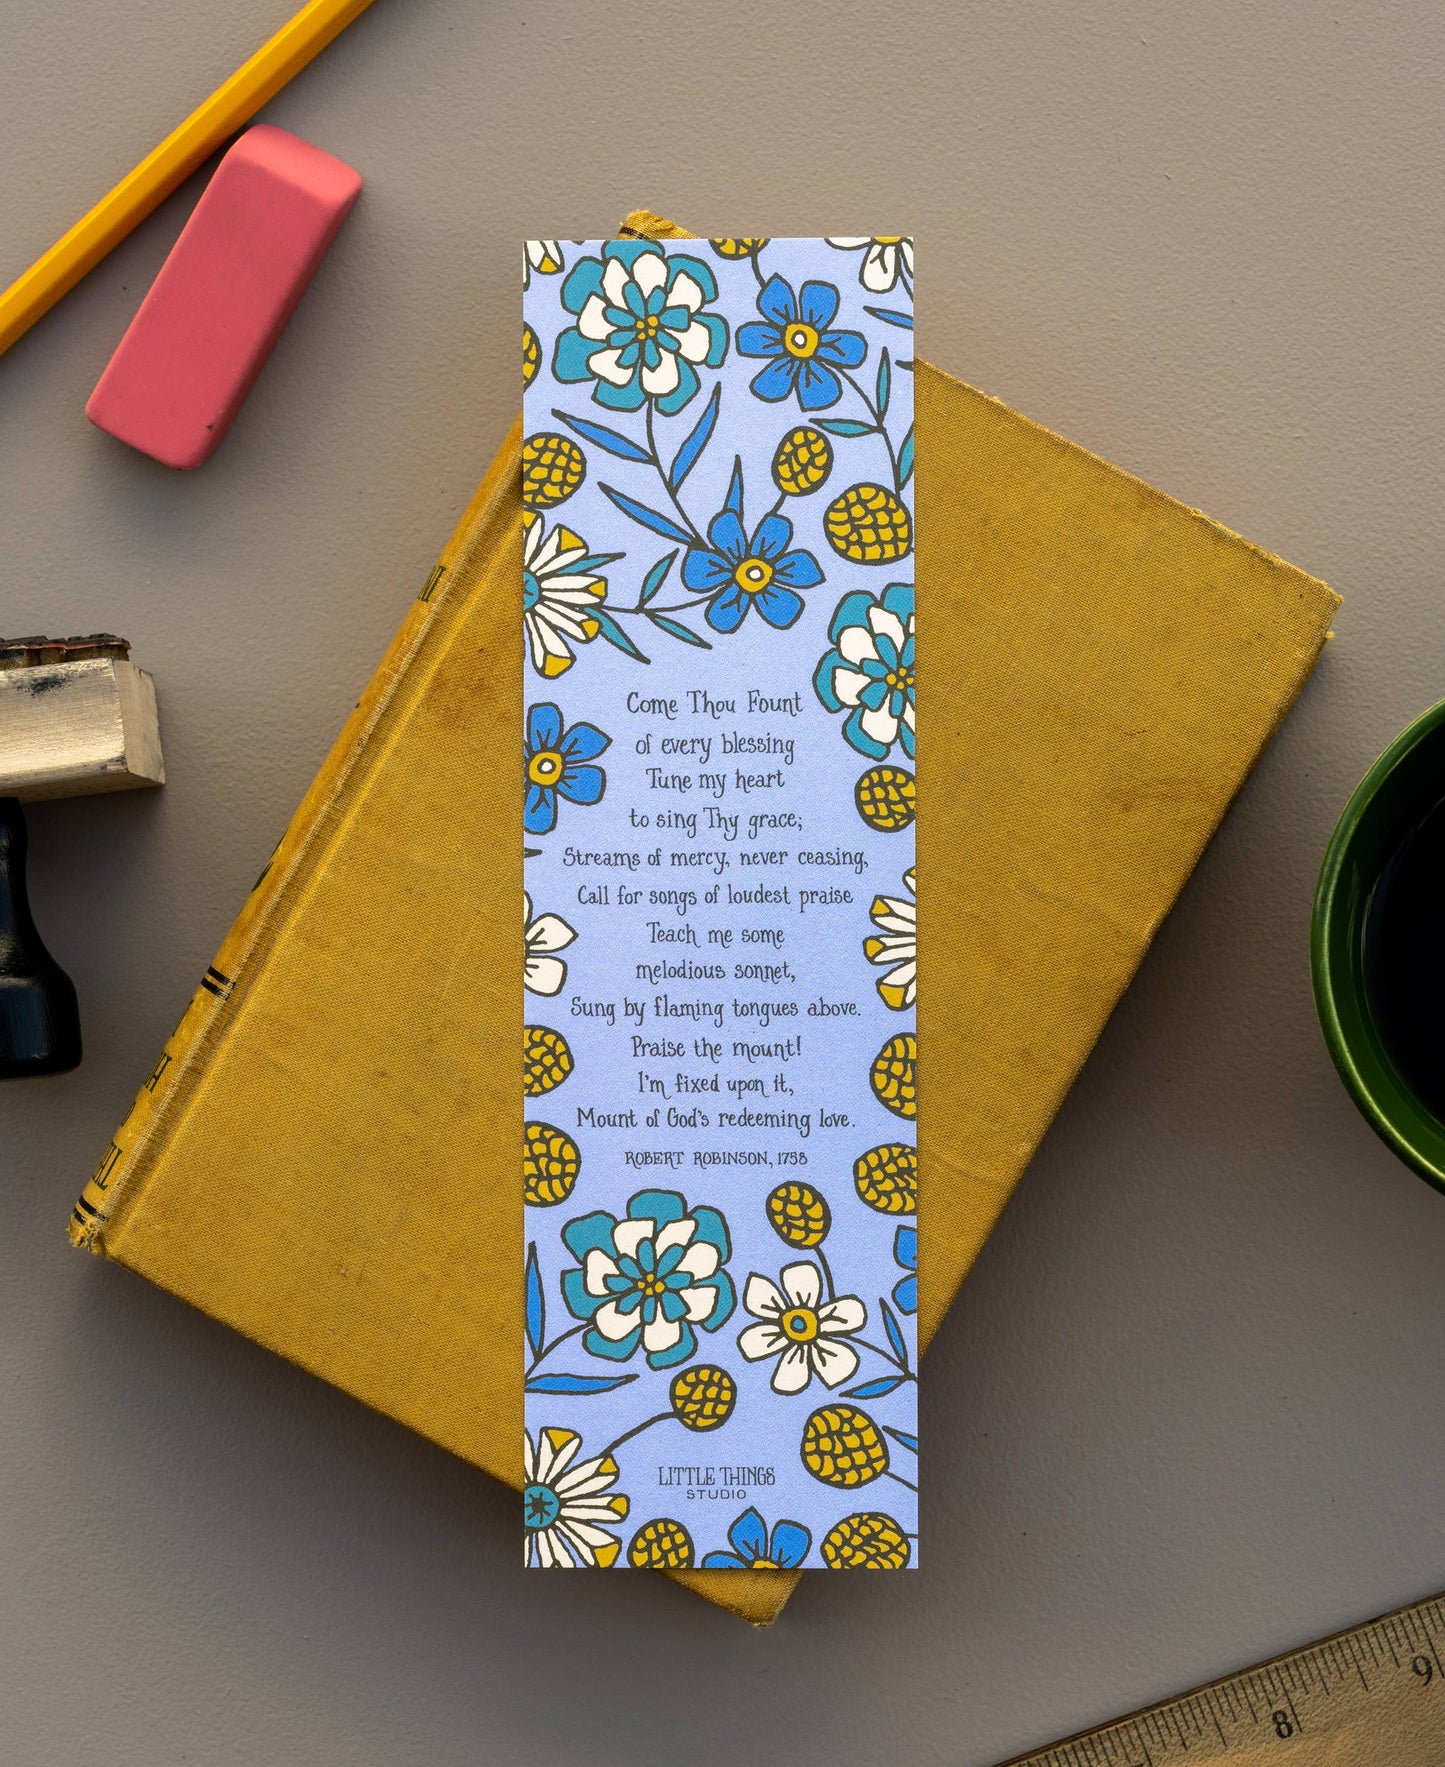 One Hymn Bookmark from the Beecher set